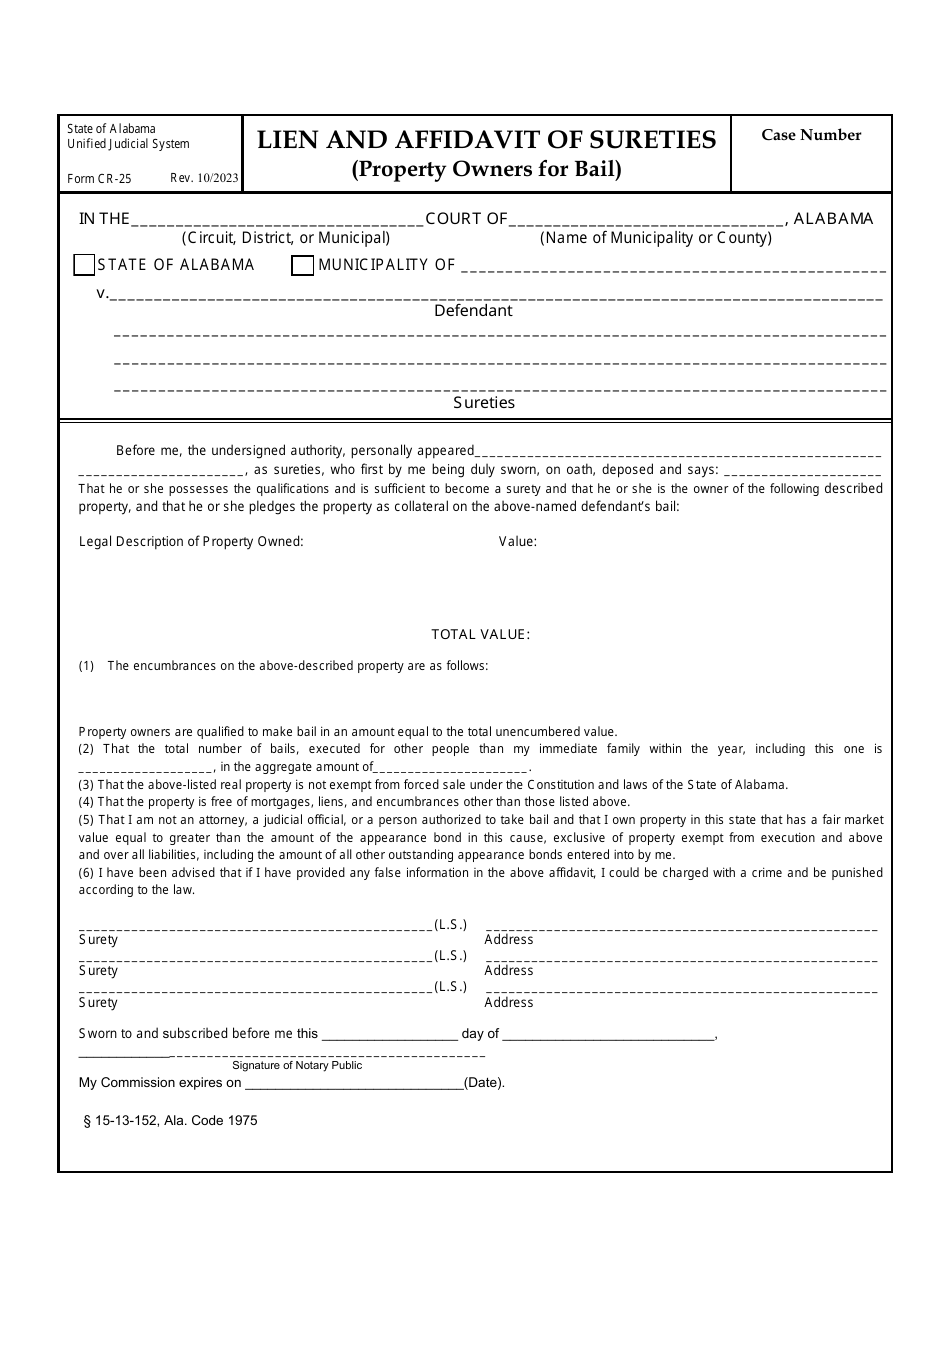 Form CR-25 Lien and Affidavit of Sureties (Property Owners for Bail) - Alabama, Page 1